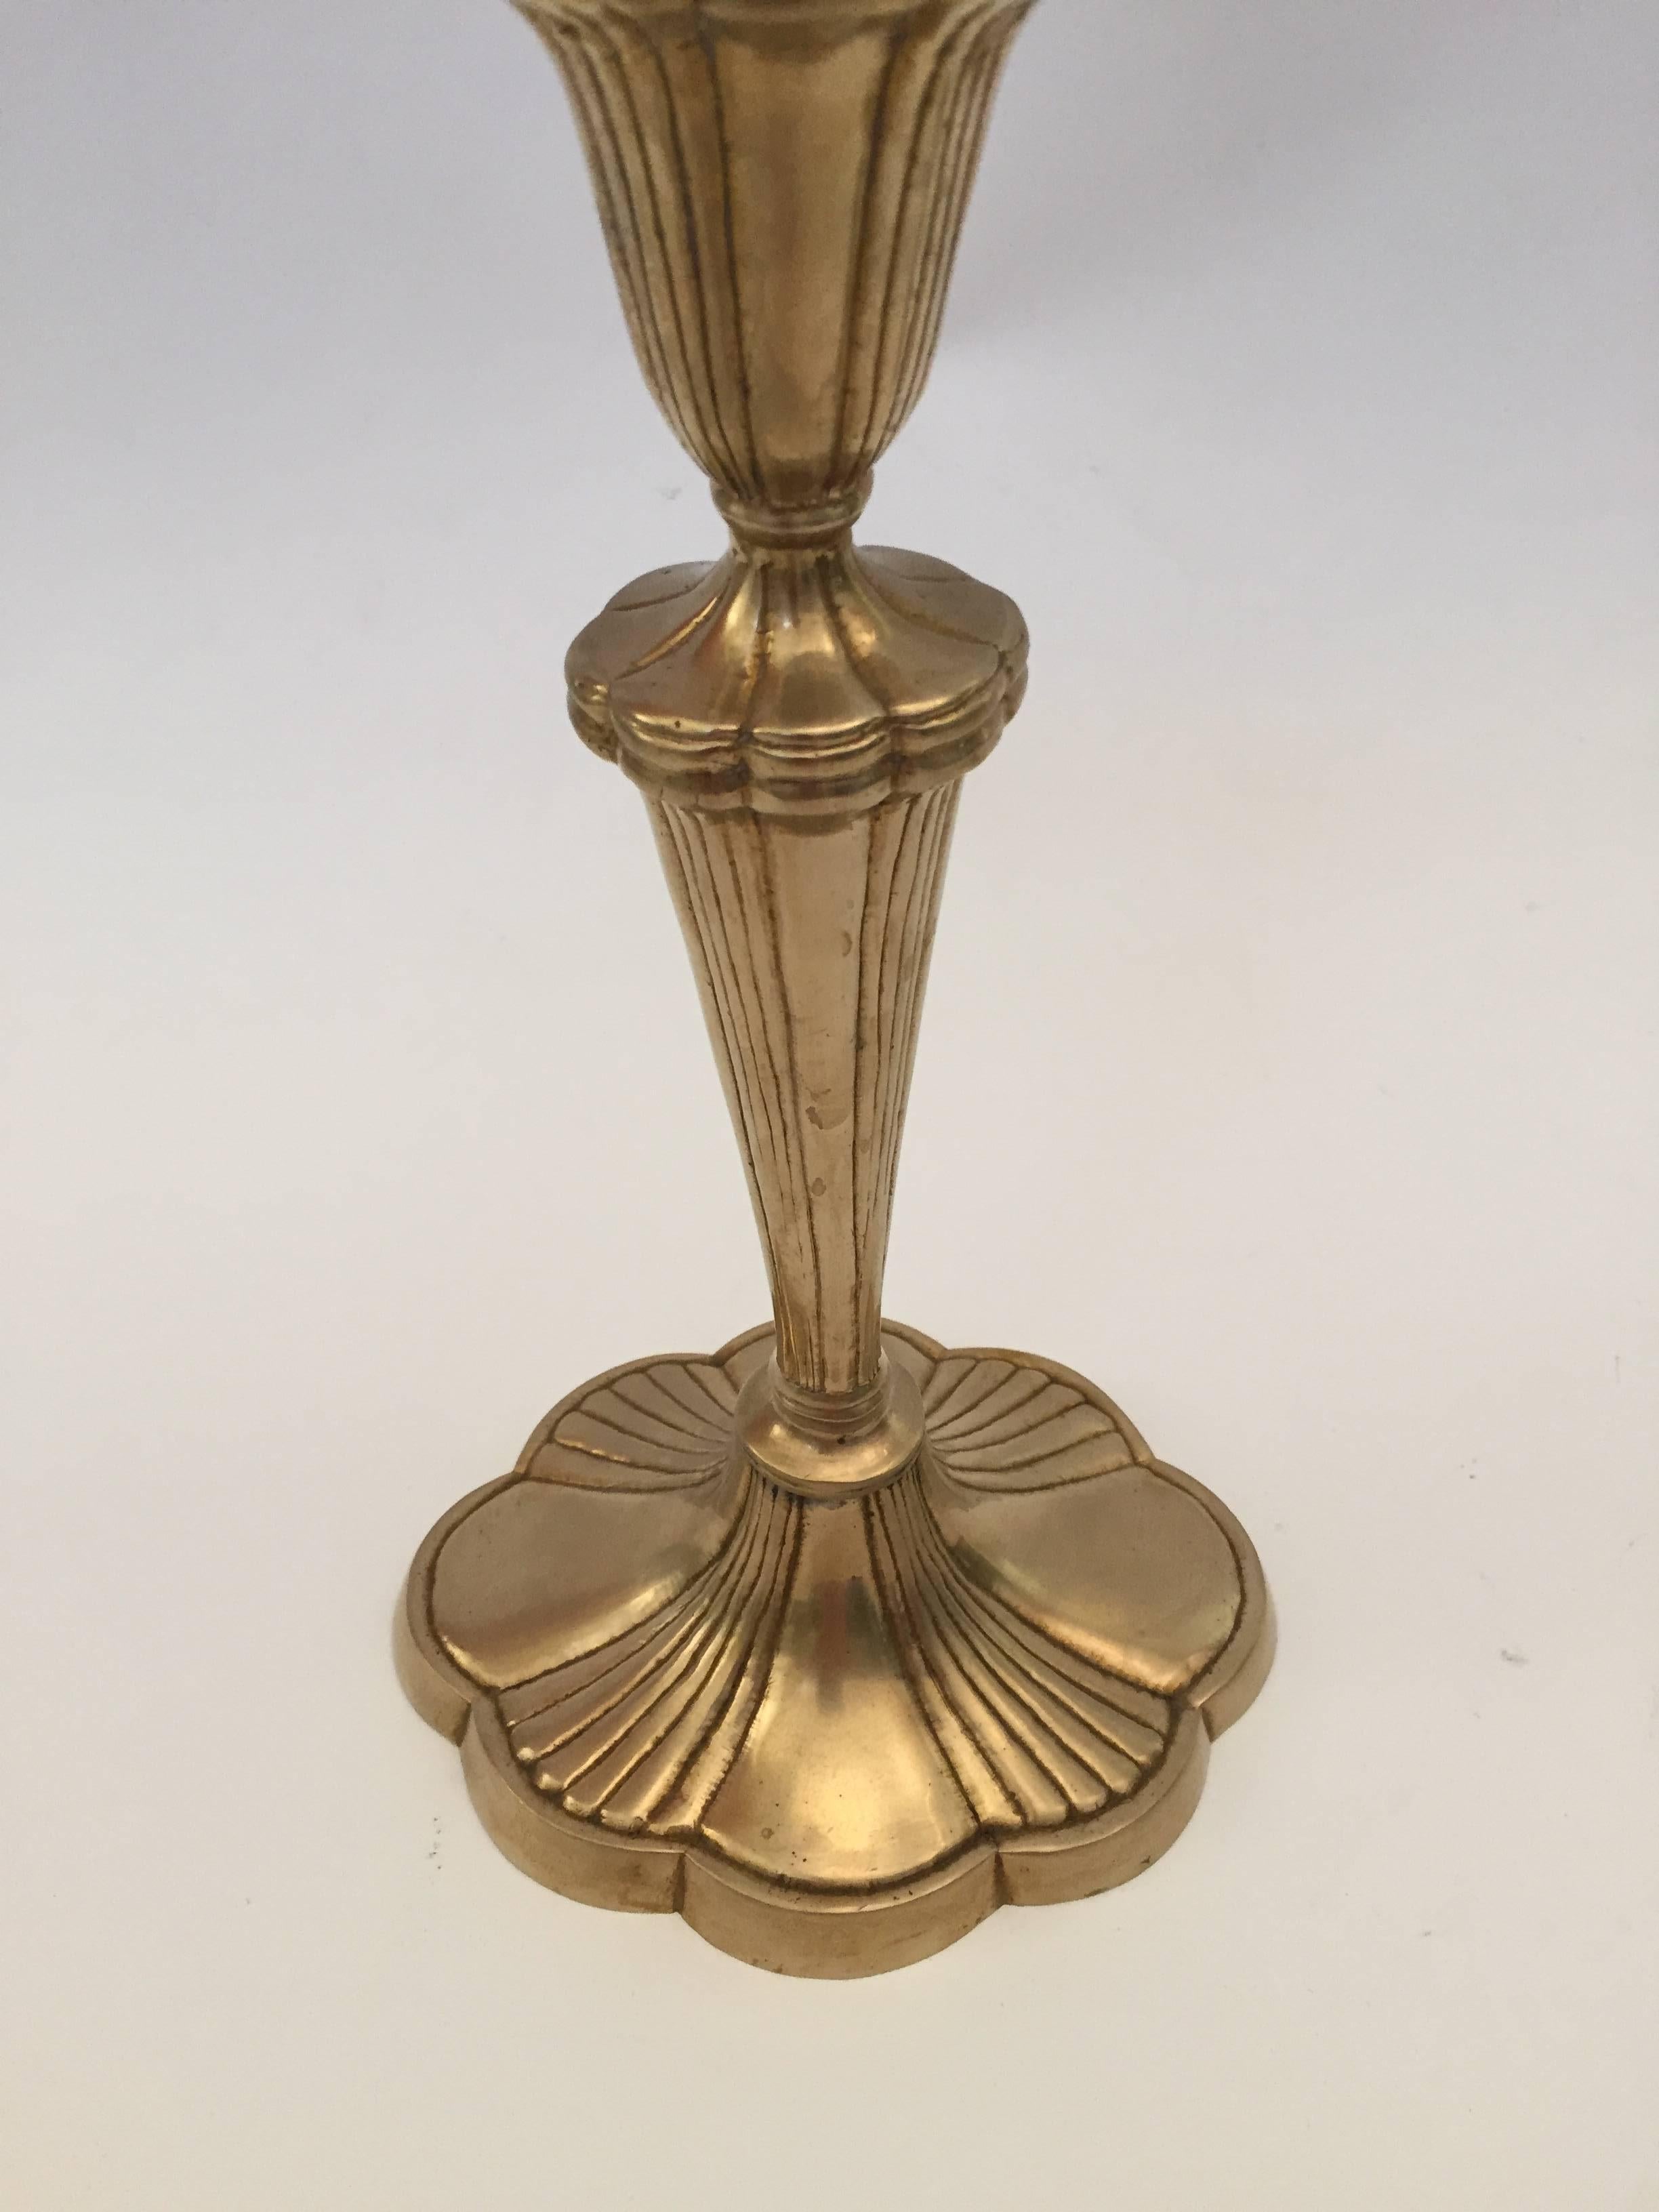 Pair of Art Nouveau Brass Candlesticks In Good Condition For Sale In North Hollywood, CA